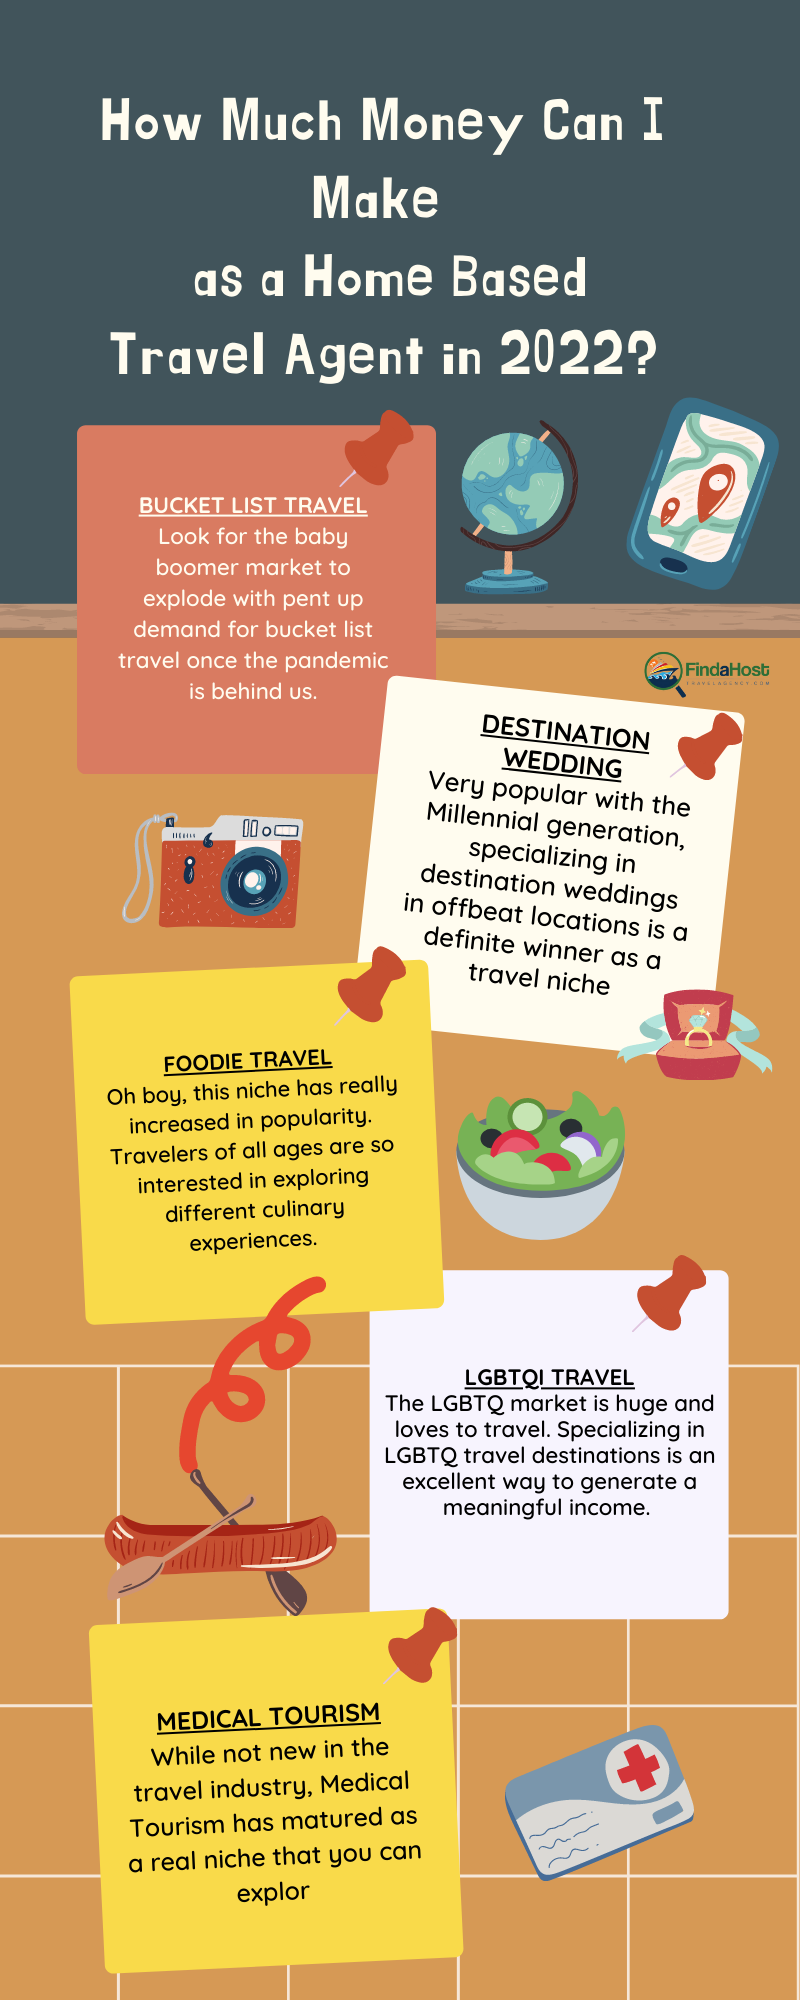 How-Much-Money-Can-I-Make-as-a-Home-Based-Travel-Agent-in-2022-Infographic-22-FAHTA